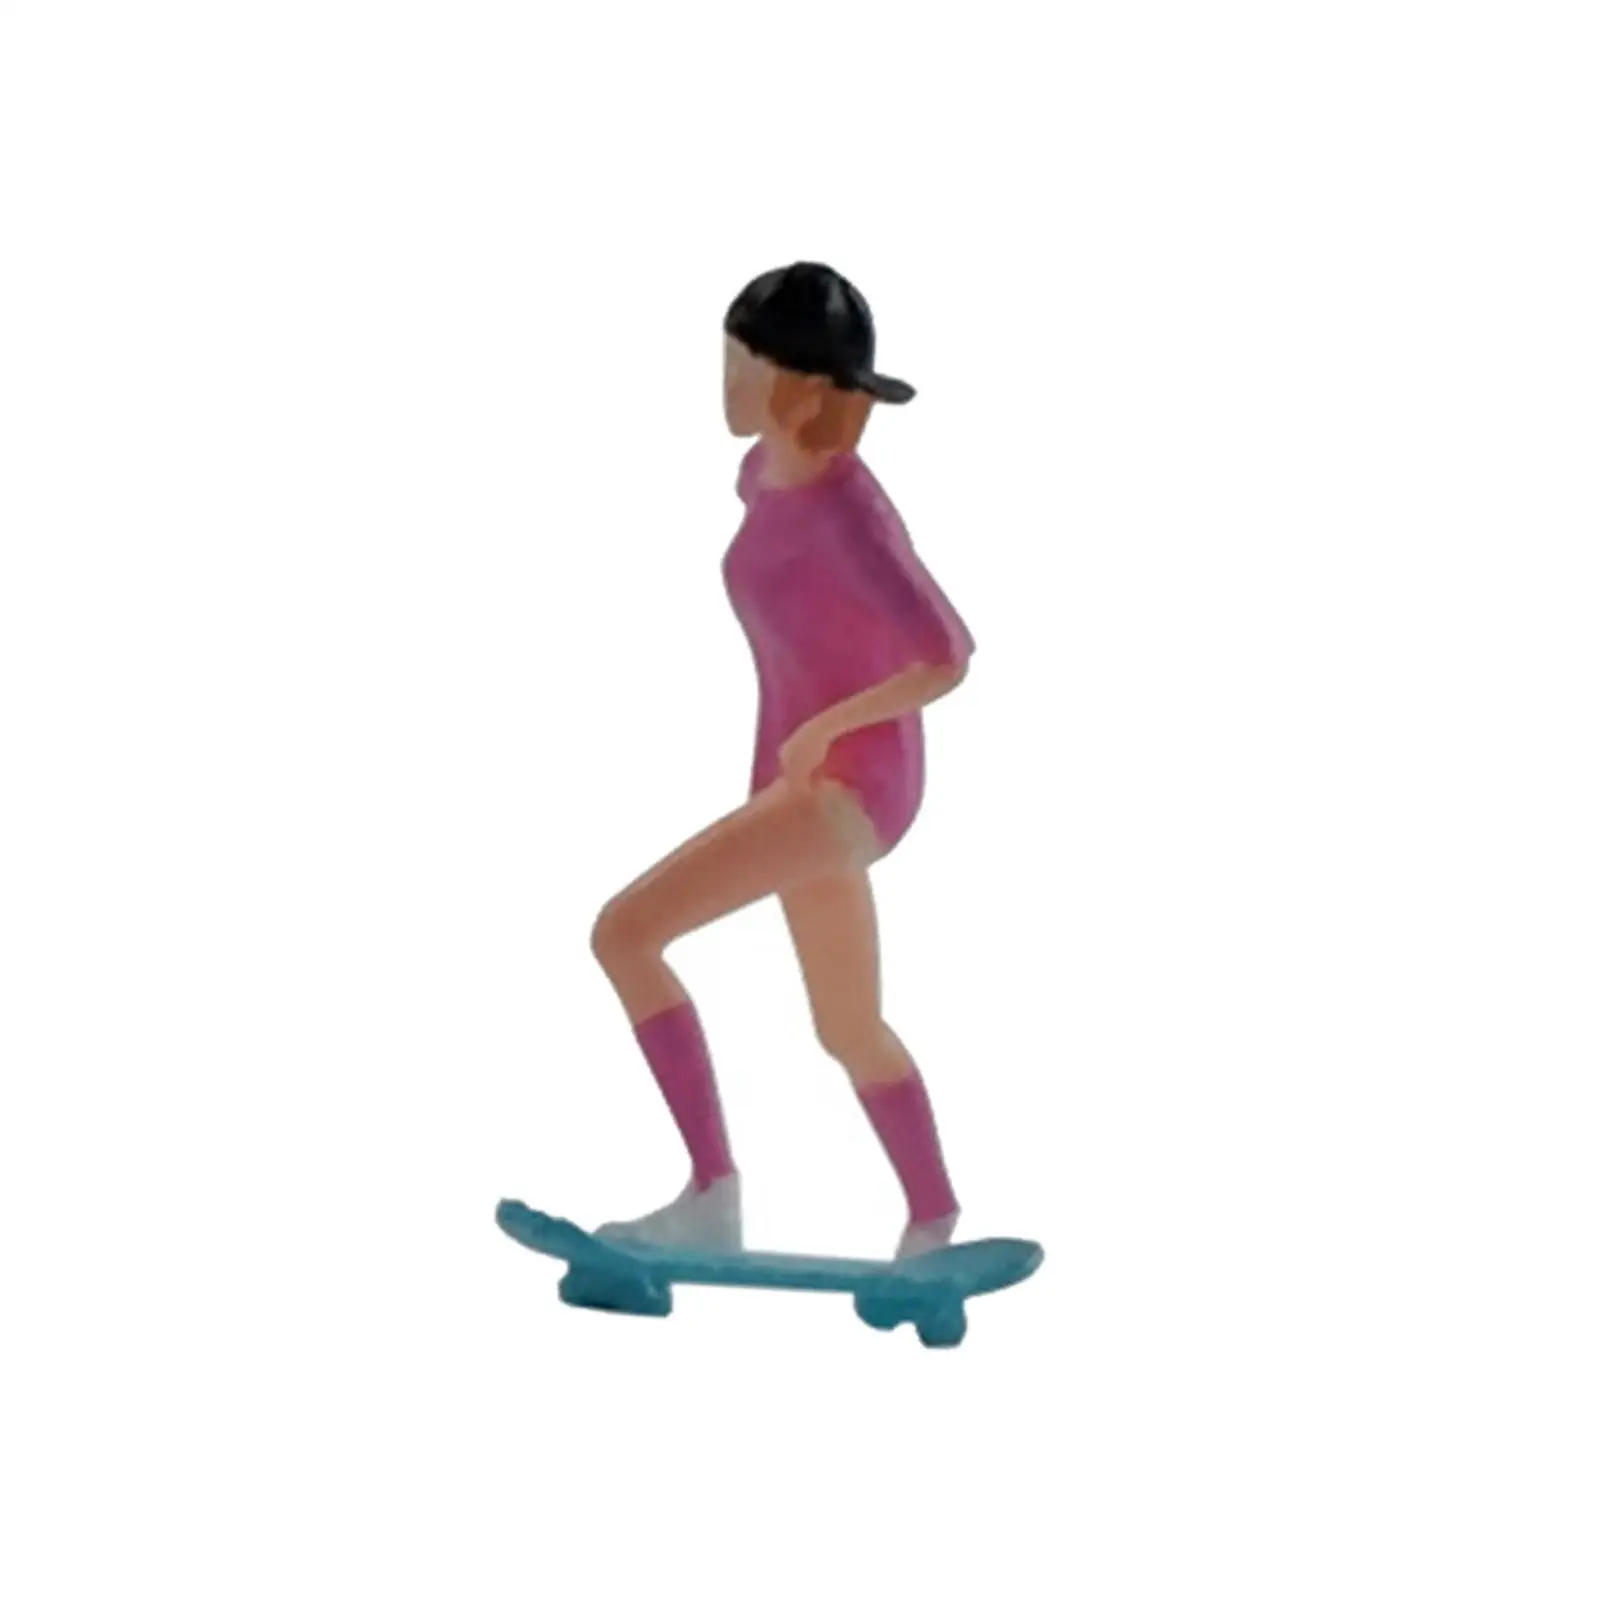 1/64 Diorama Figures Model Skateboard Girl Tiny People for Layout Ornament